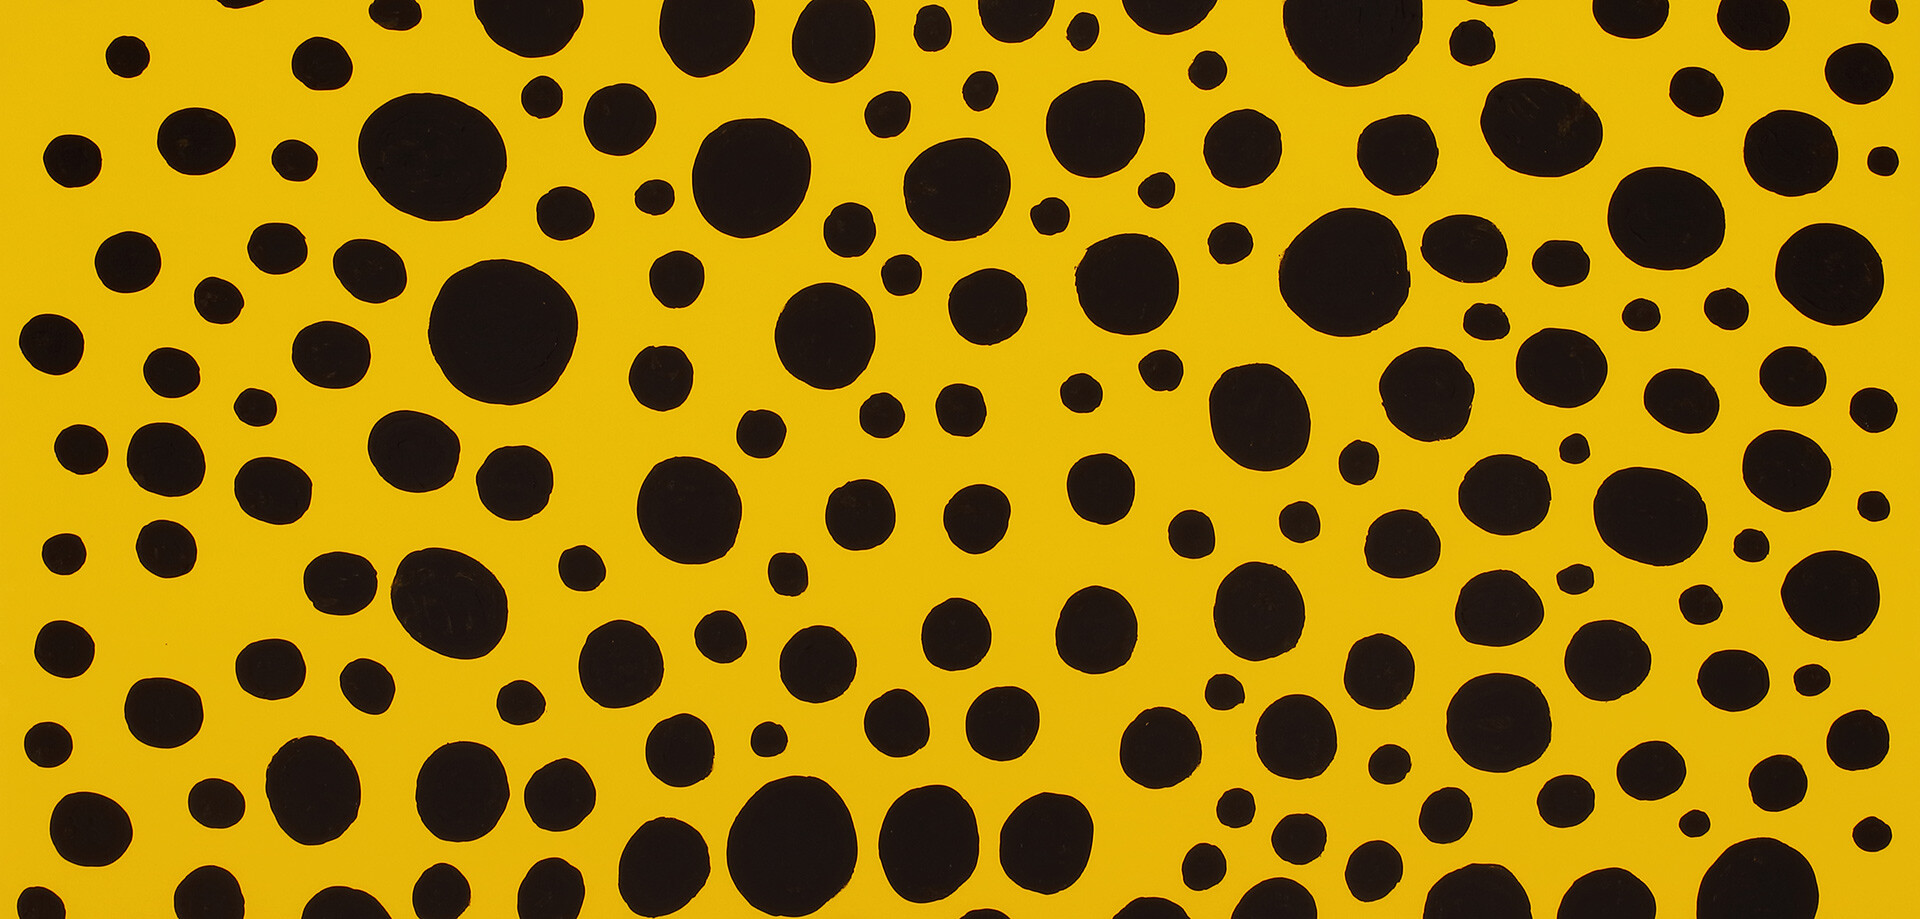 A detail from a work by Yayoi Kusama, titled A WORD CALLED HAPPINESS, dated 2016.